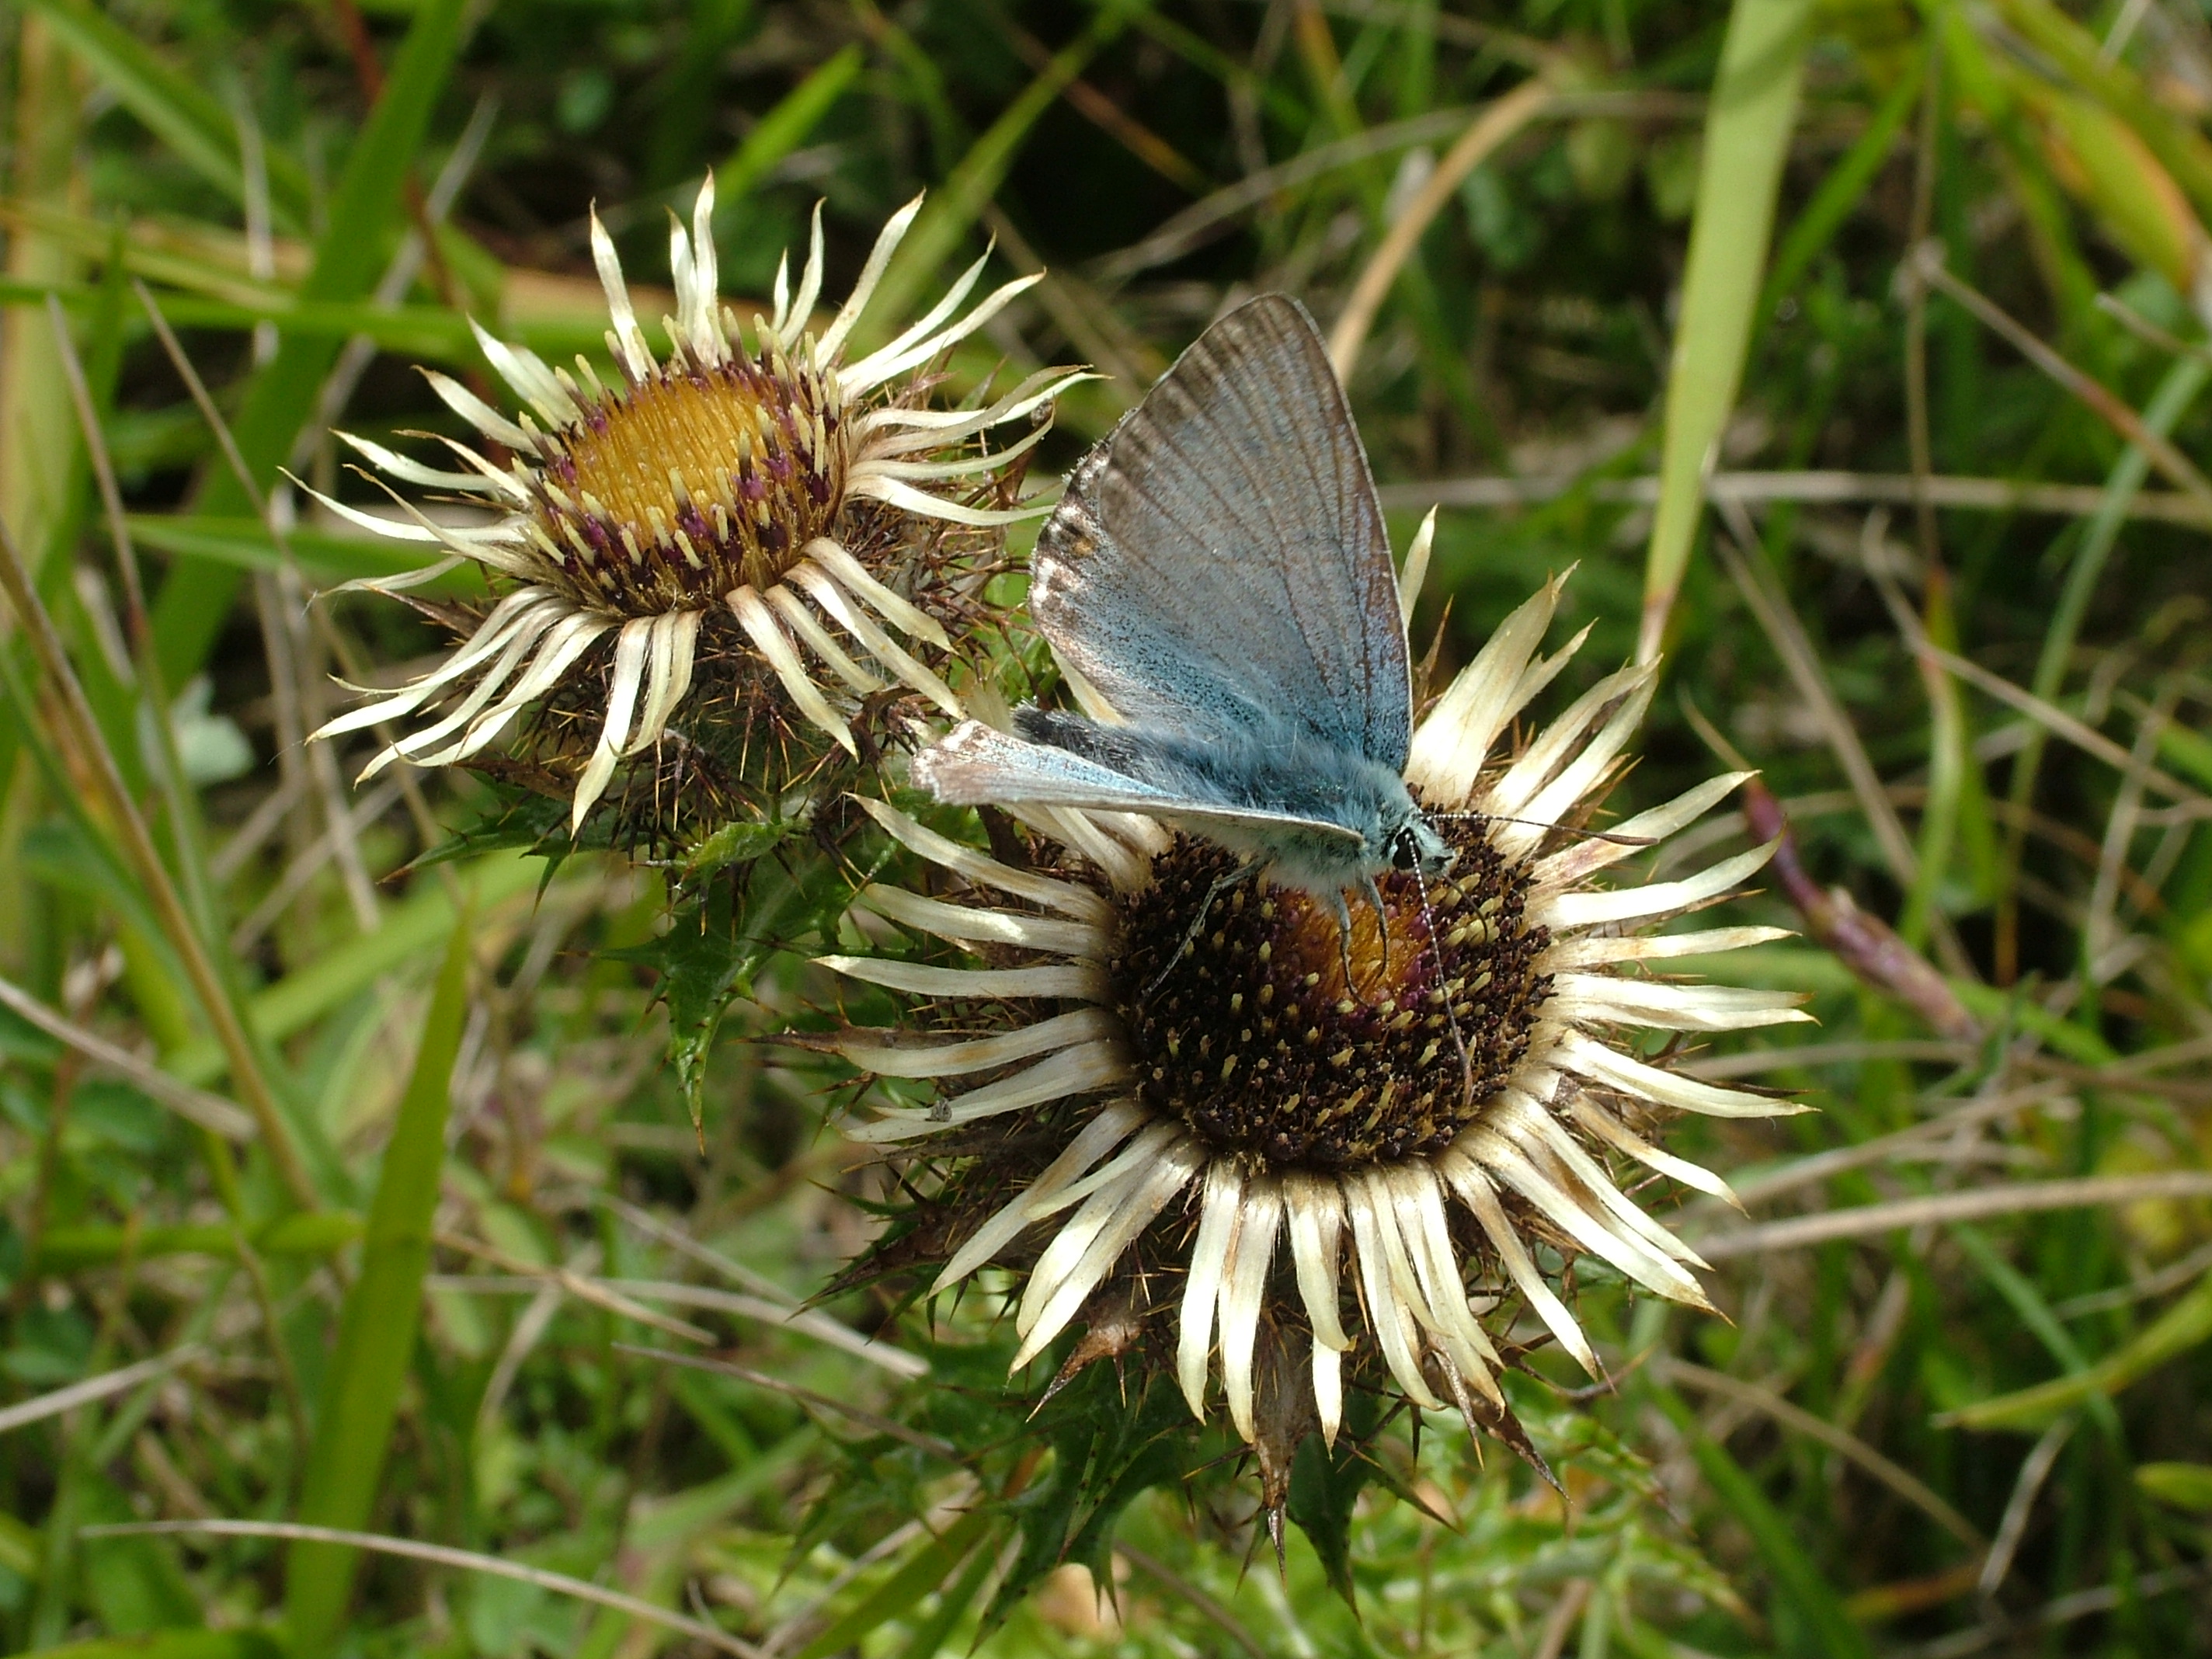 An infrequently recorded interaction between a chalkhill blue butterfly (<em>Polyommatus coridon</em>) and a carline thistle (<em>Carlina acaulis</em>). Image: Nicholas J. Balfour.